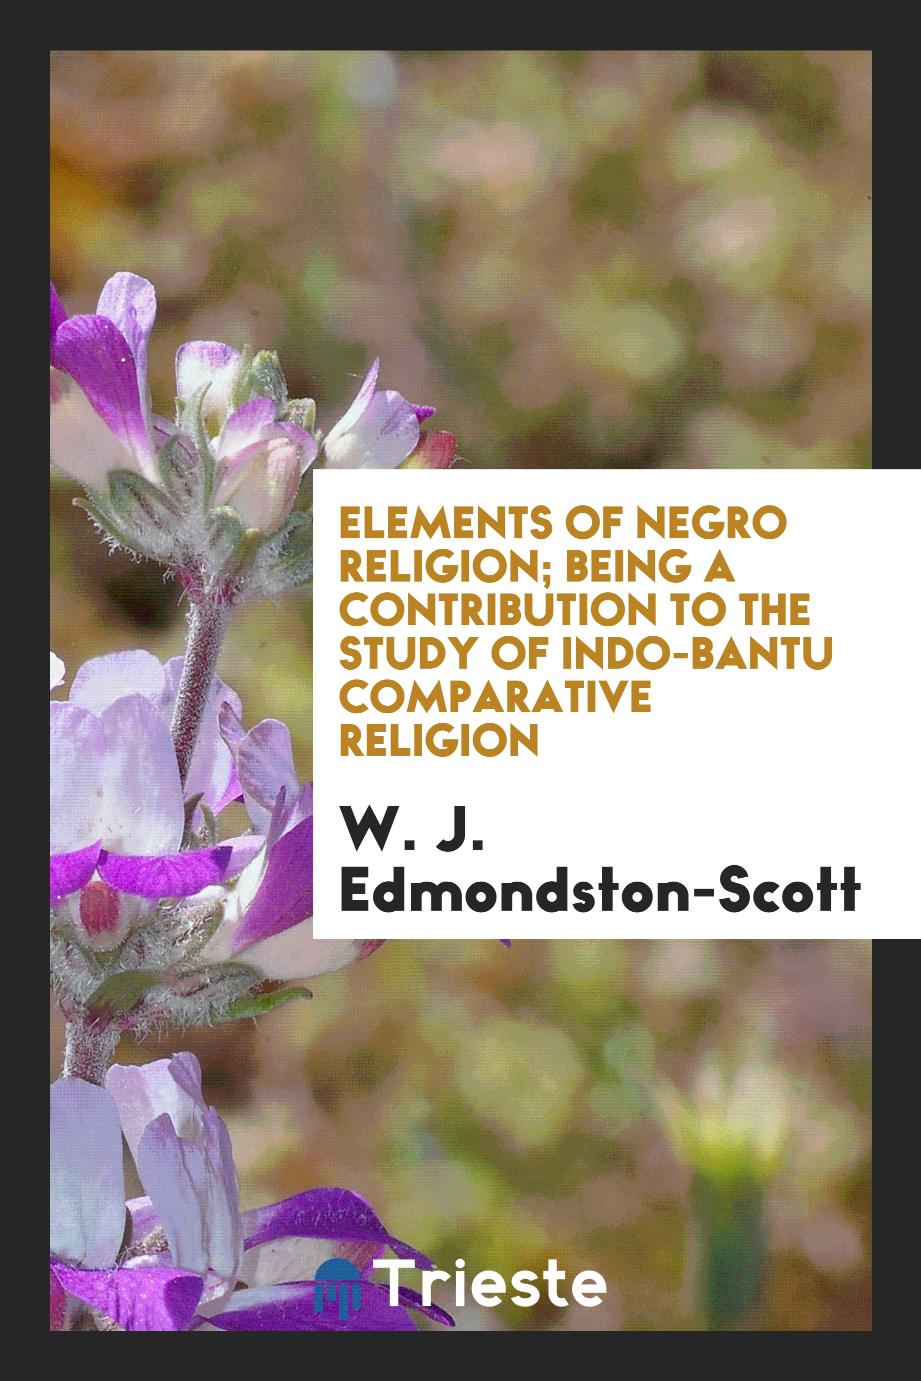 Elements of negro religion; being a contribution to the study of Indo-Bantu comparative religion